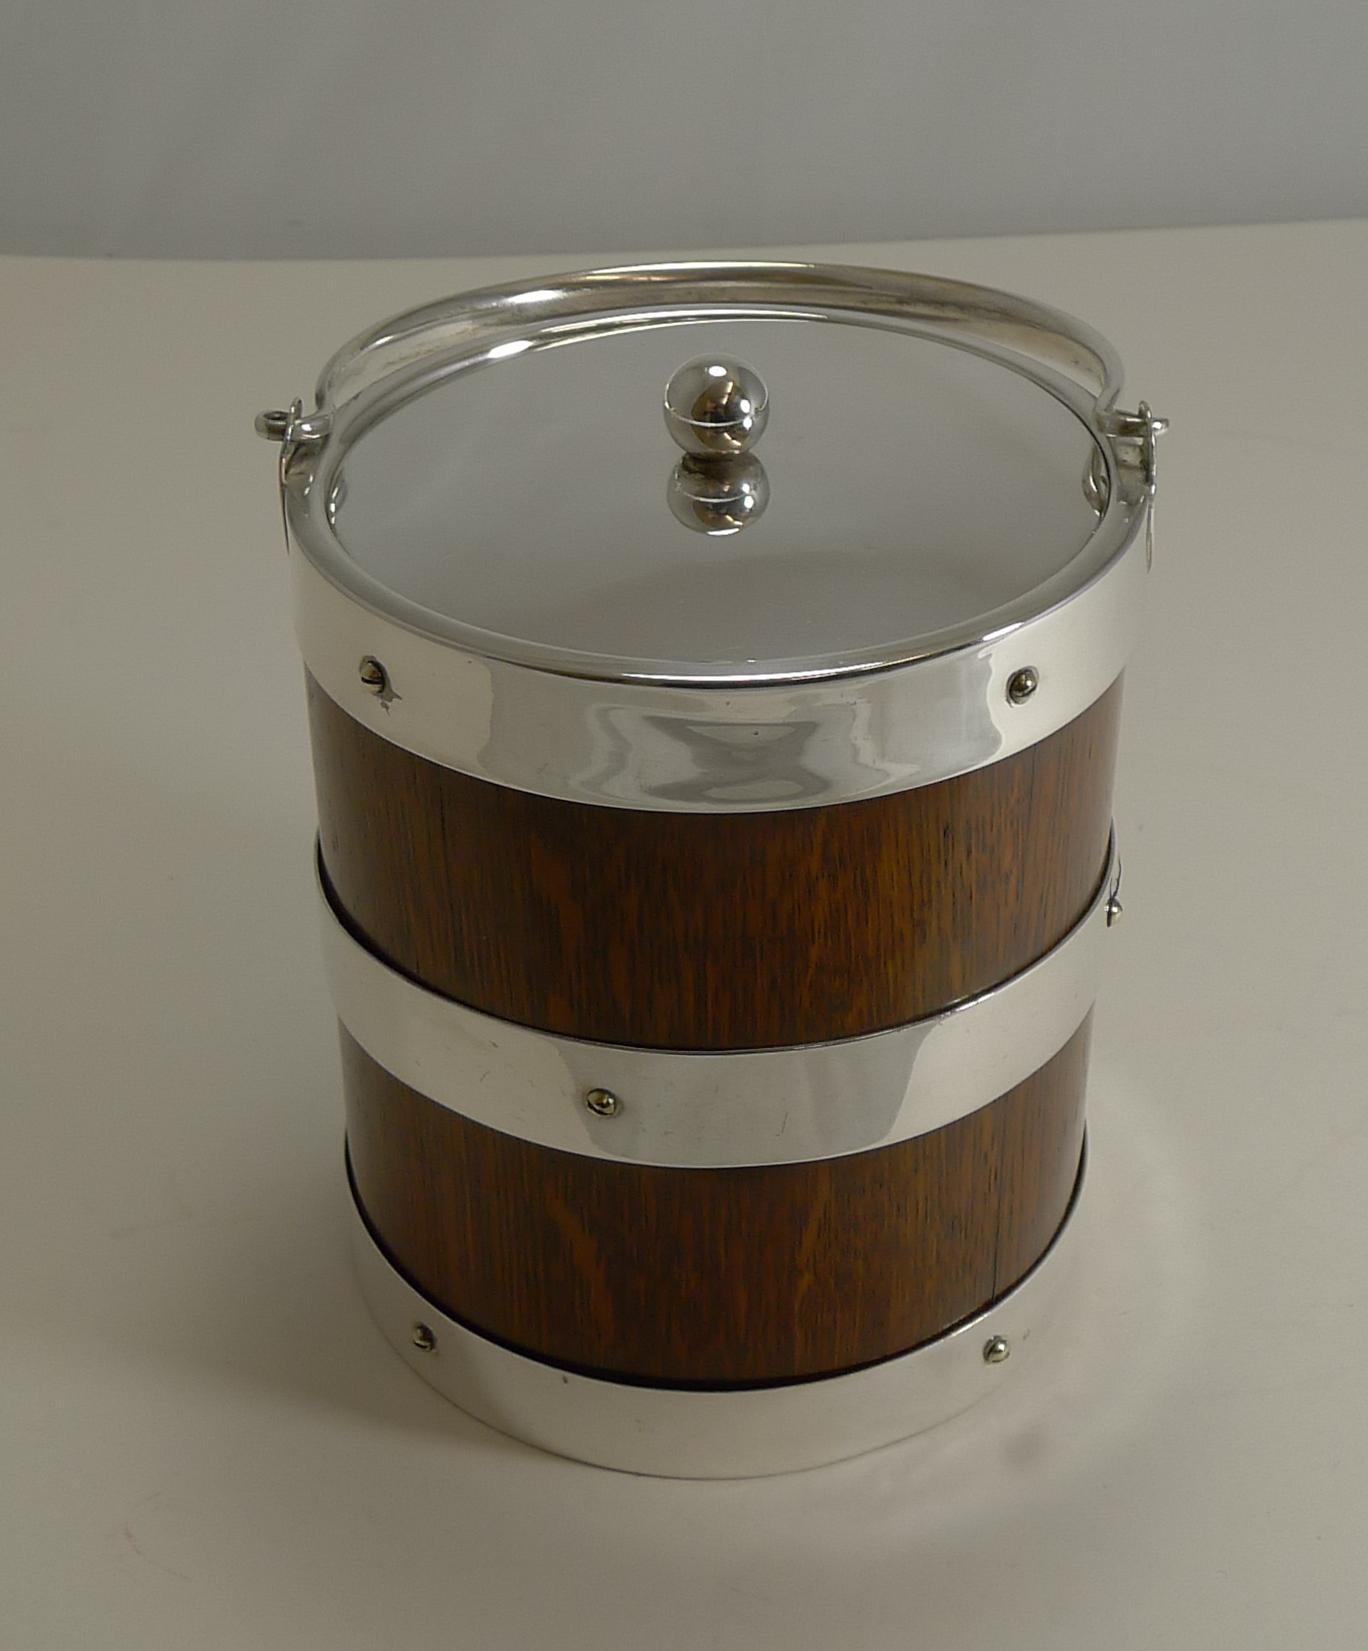 This particular late Victorian biscuit box or barrel lends itself to doubling as an ice bucket due to it's size and straight lines, take a look at the last photograph.

Made from solid English oak the box is mounted with silver plated fittings